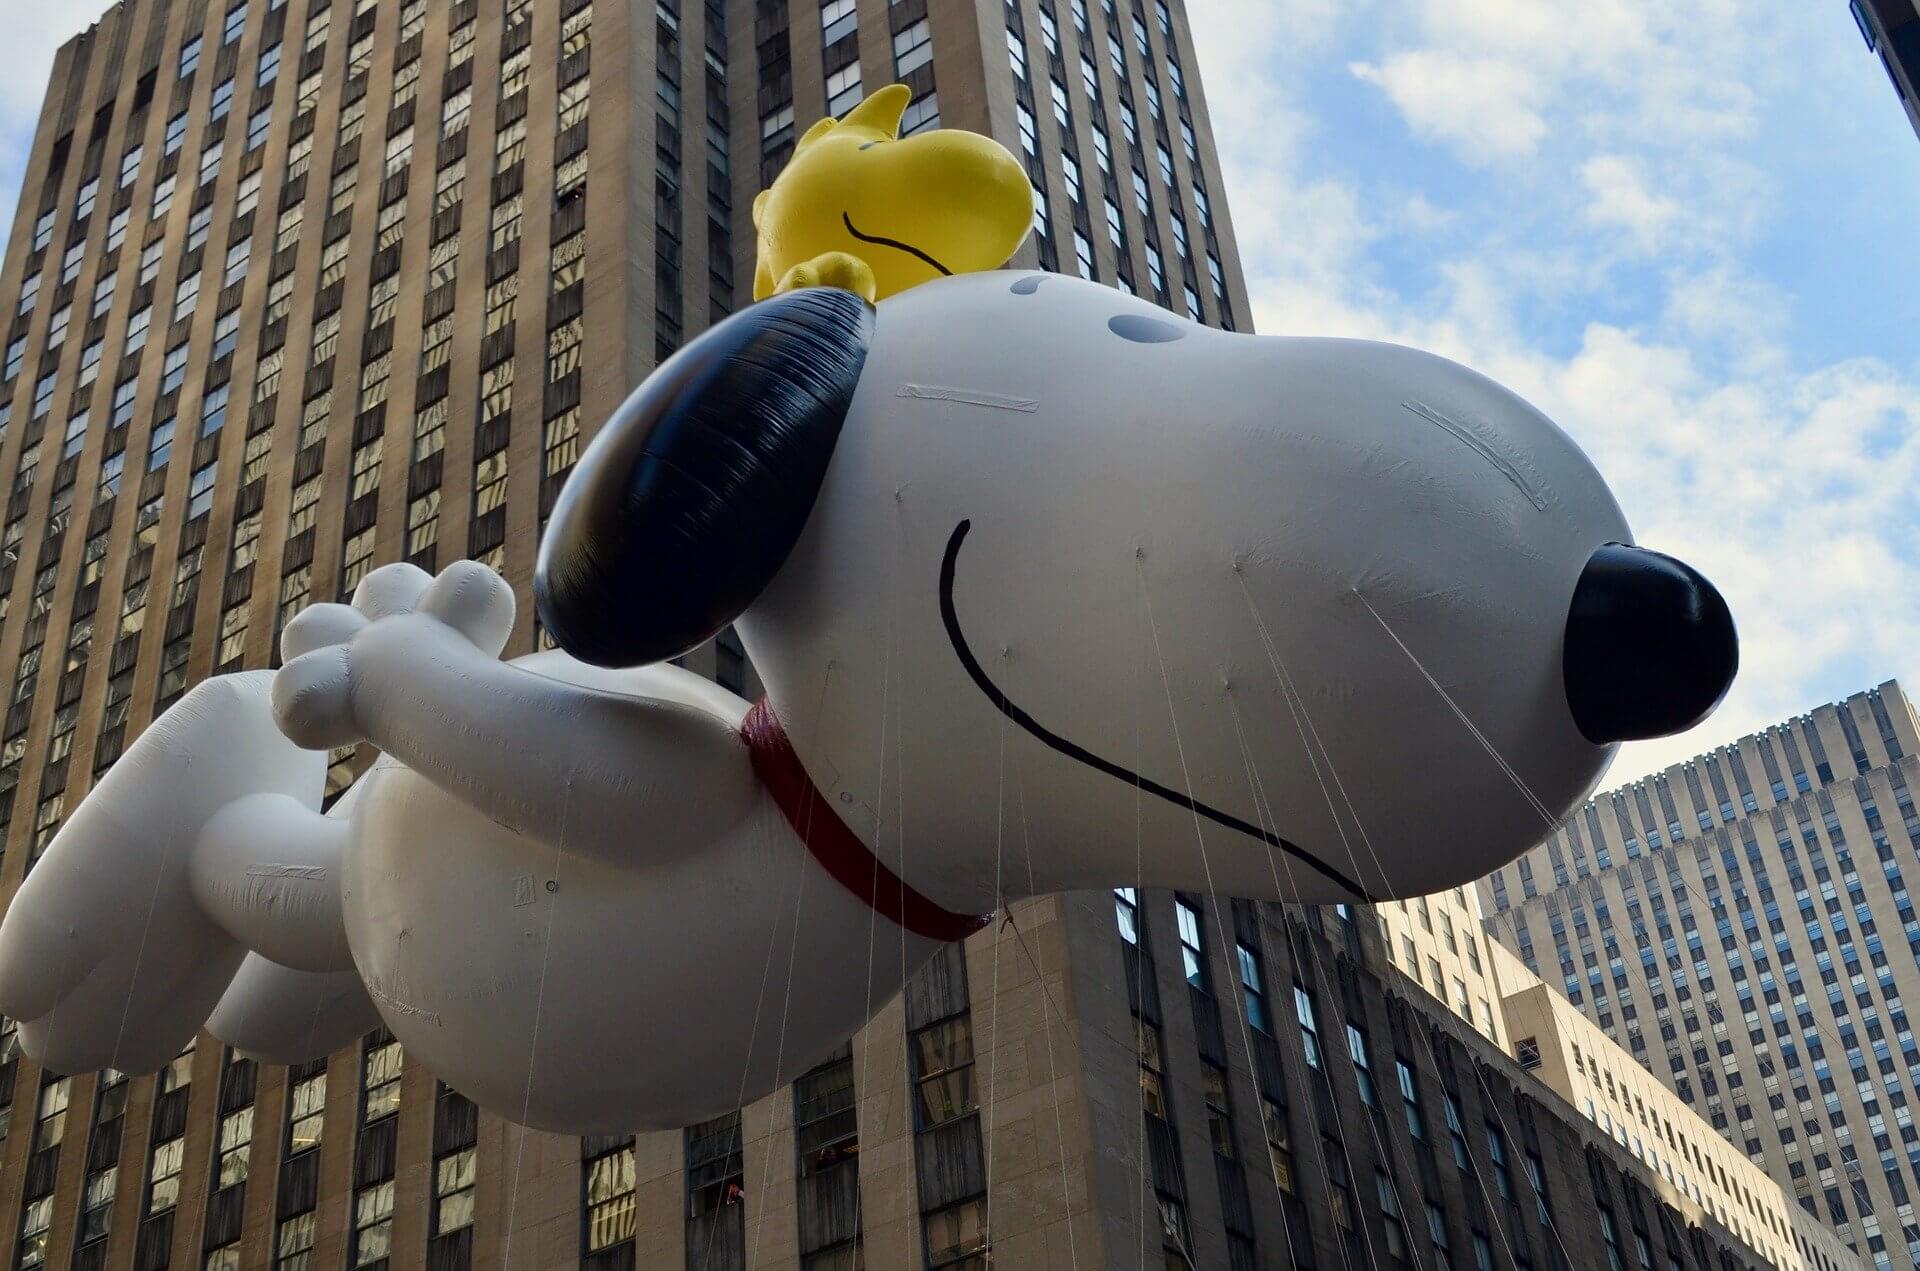 Macys Thanks Giving Day Parade NYC | FlyCheapAlways